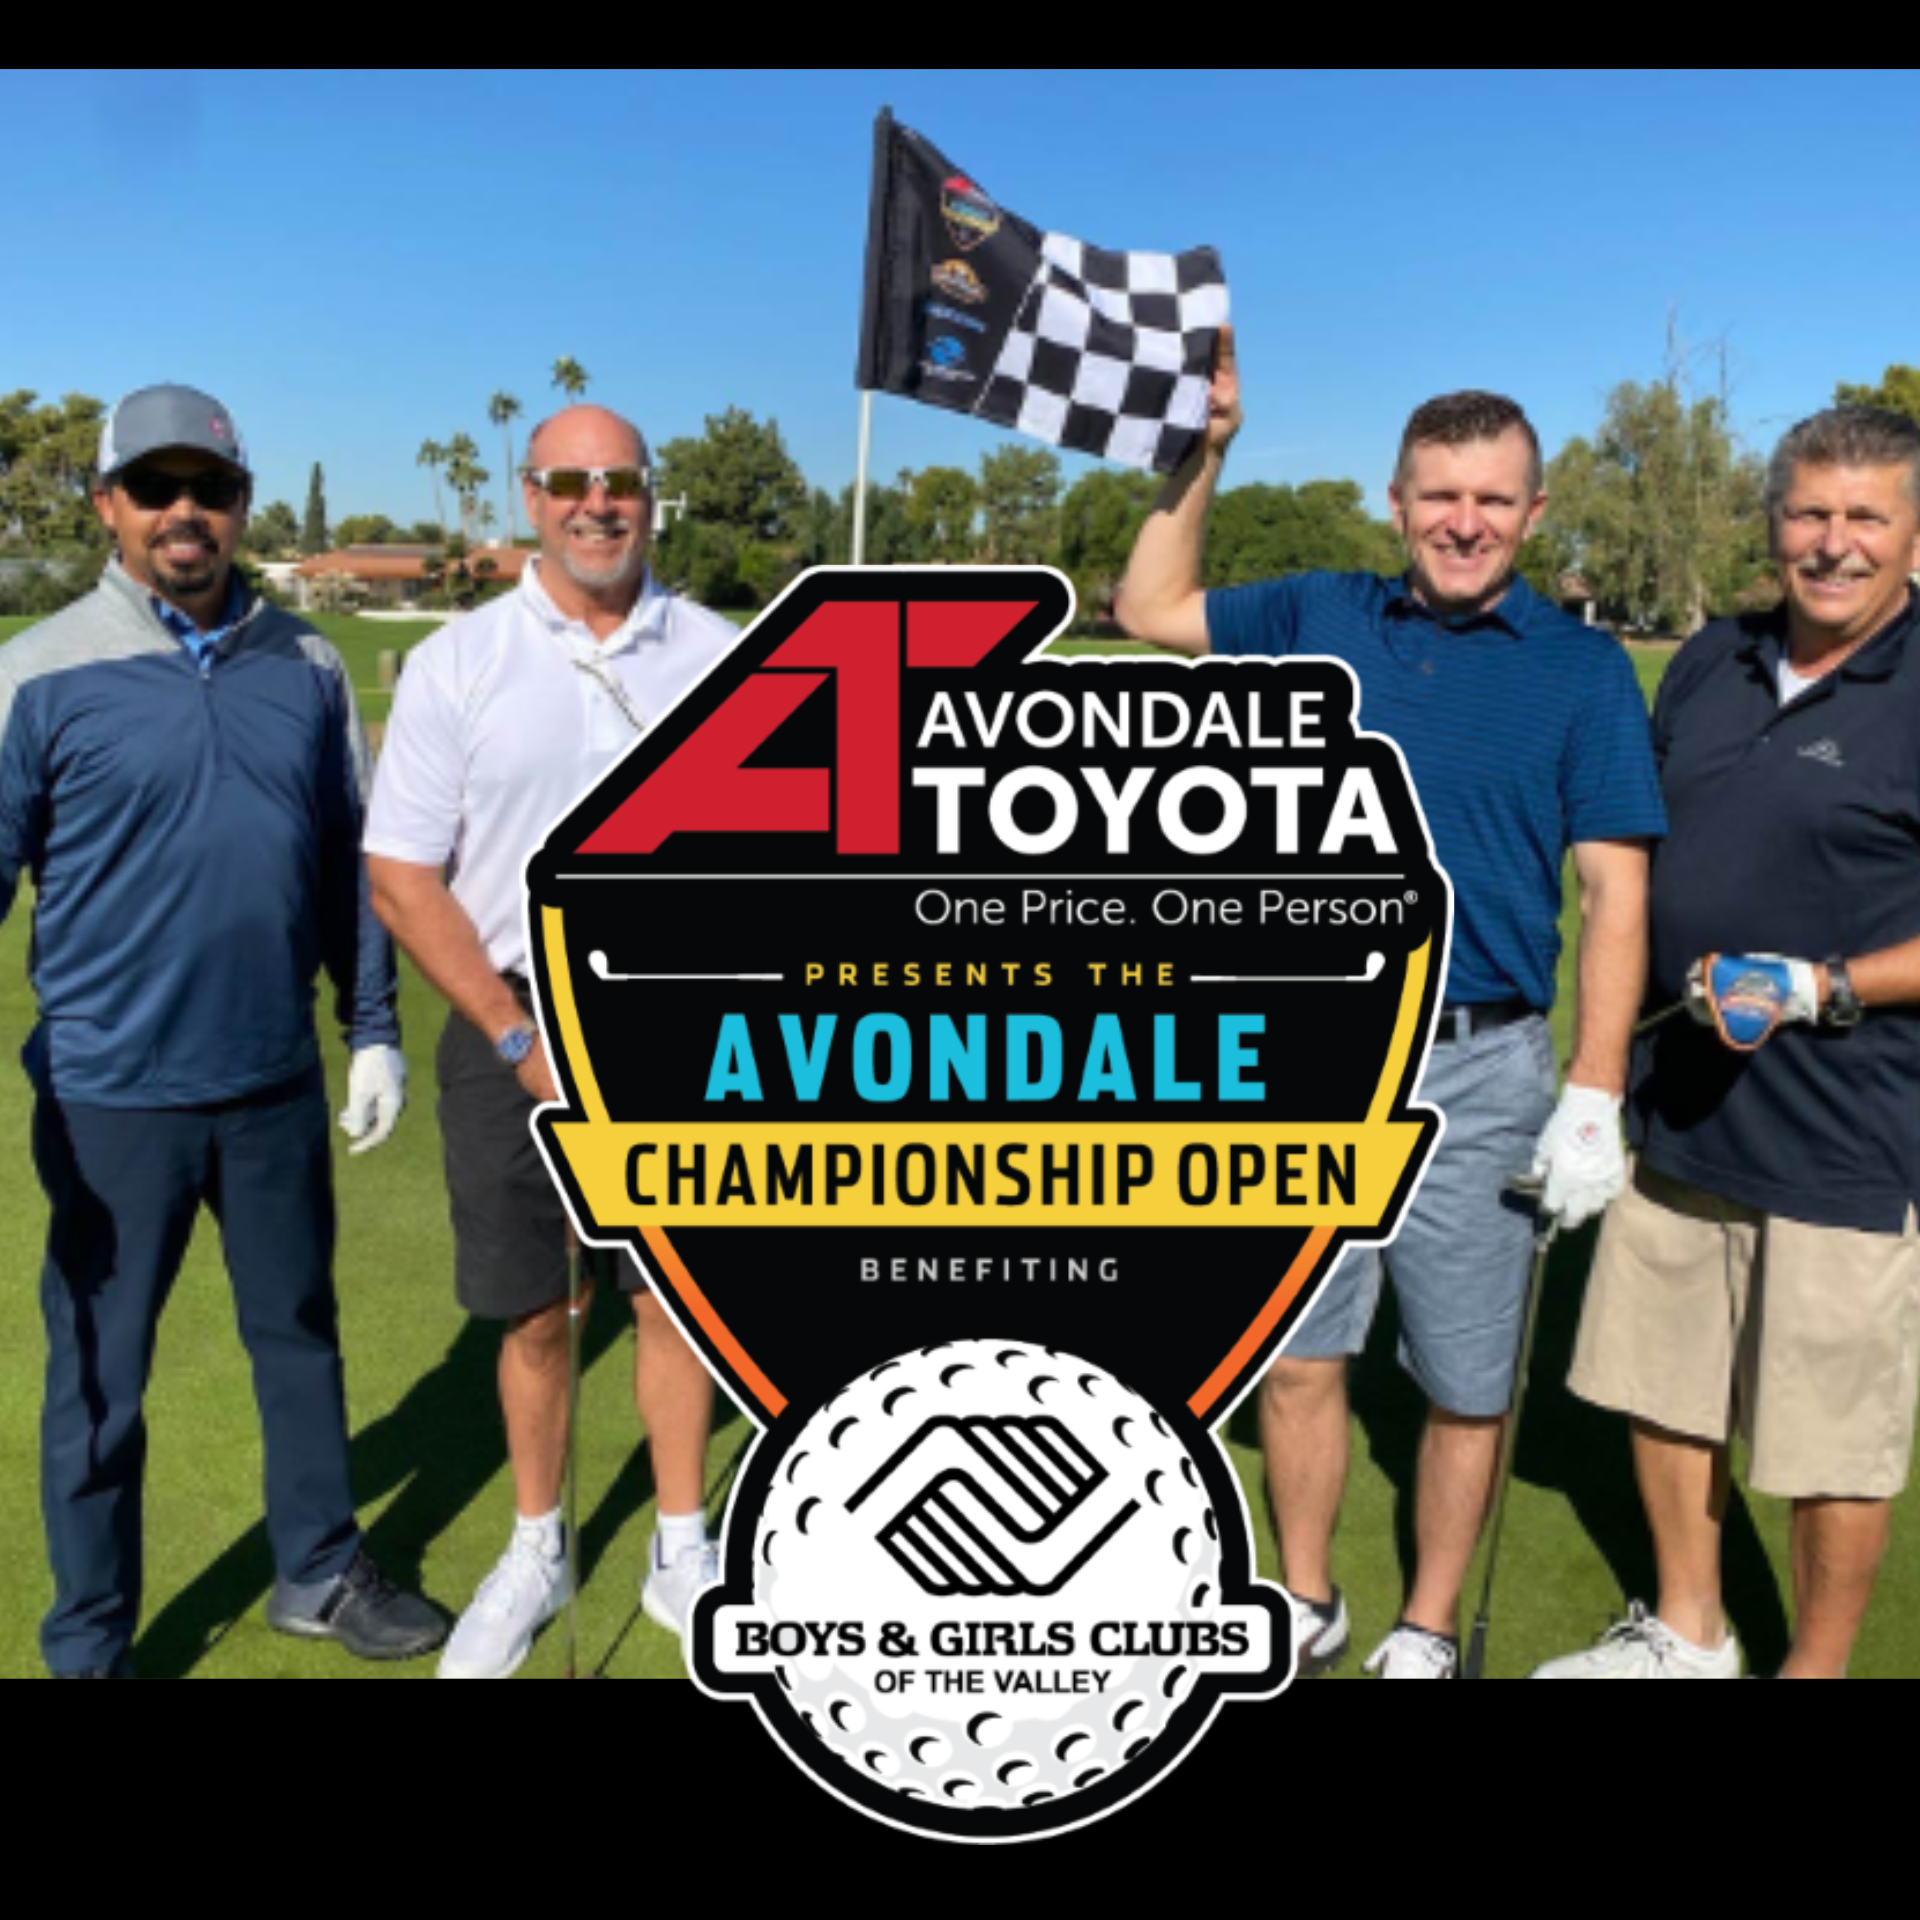 2023 Avondale Championship Open benefiting Boys & Girls Clubs of the Valley